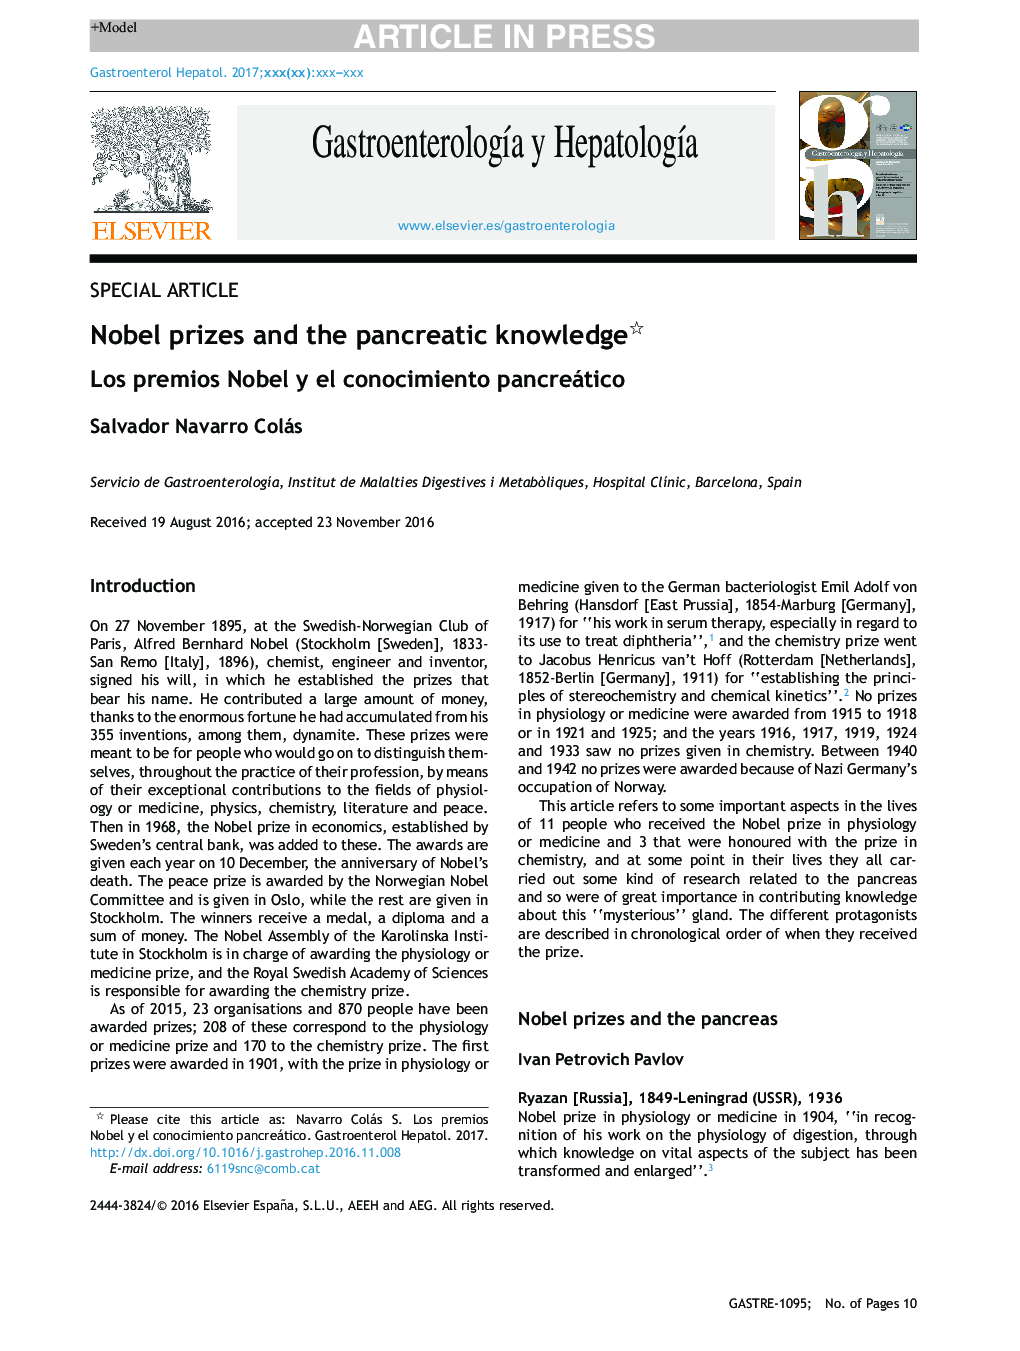 Nobel prizes and the pancreatic knowledge